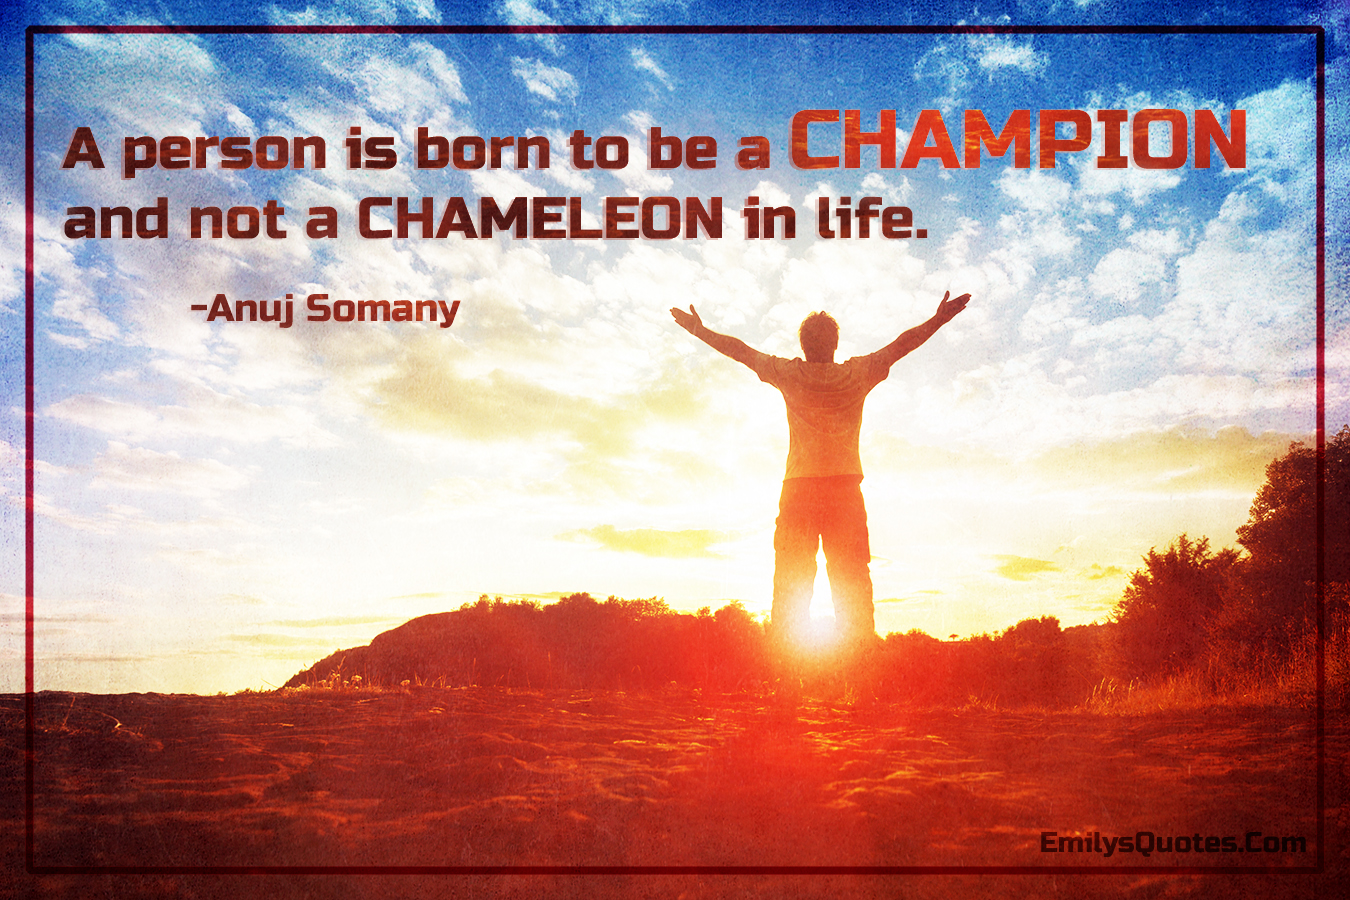 A person is born to be a CHAMPION and not a CHAMELEON in life